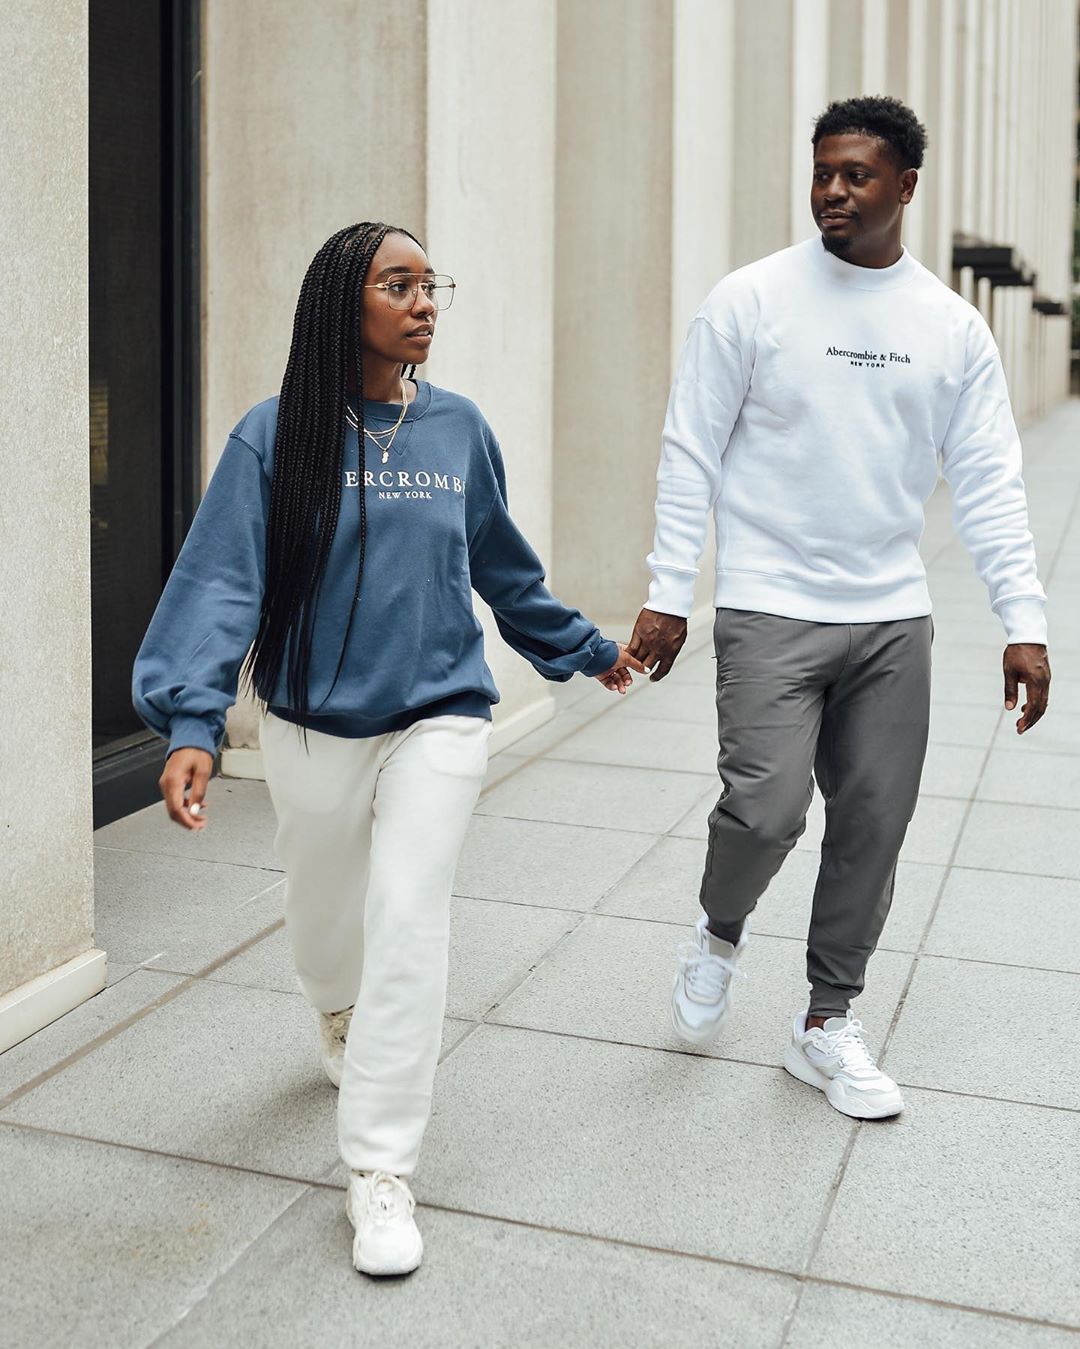 Abercrombie & Fitch - "Ahmad and I met right outside of A&F, where we both worked as managers. Fast forward to today, and we’re still rocking Abercrombie and wearing the 96 Hours Collection!” Not to b...